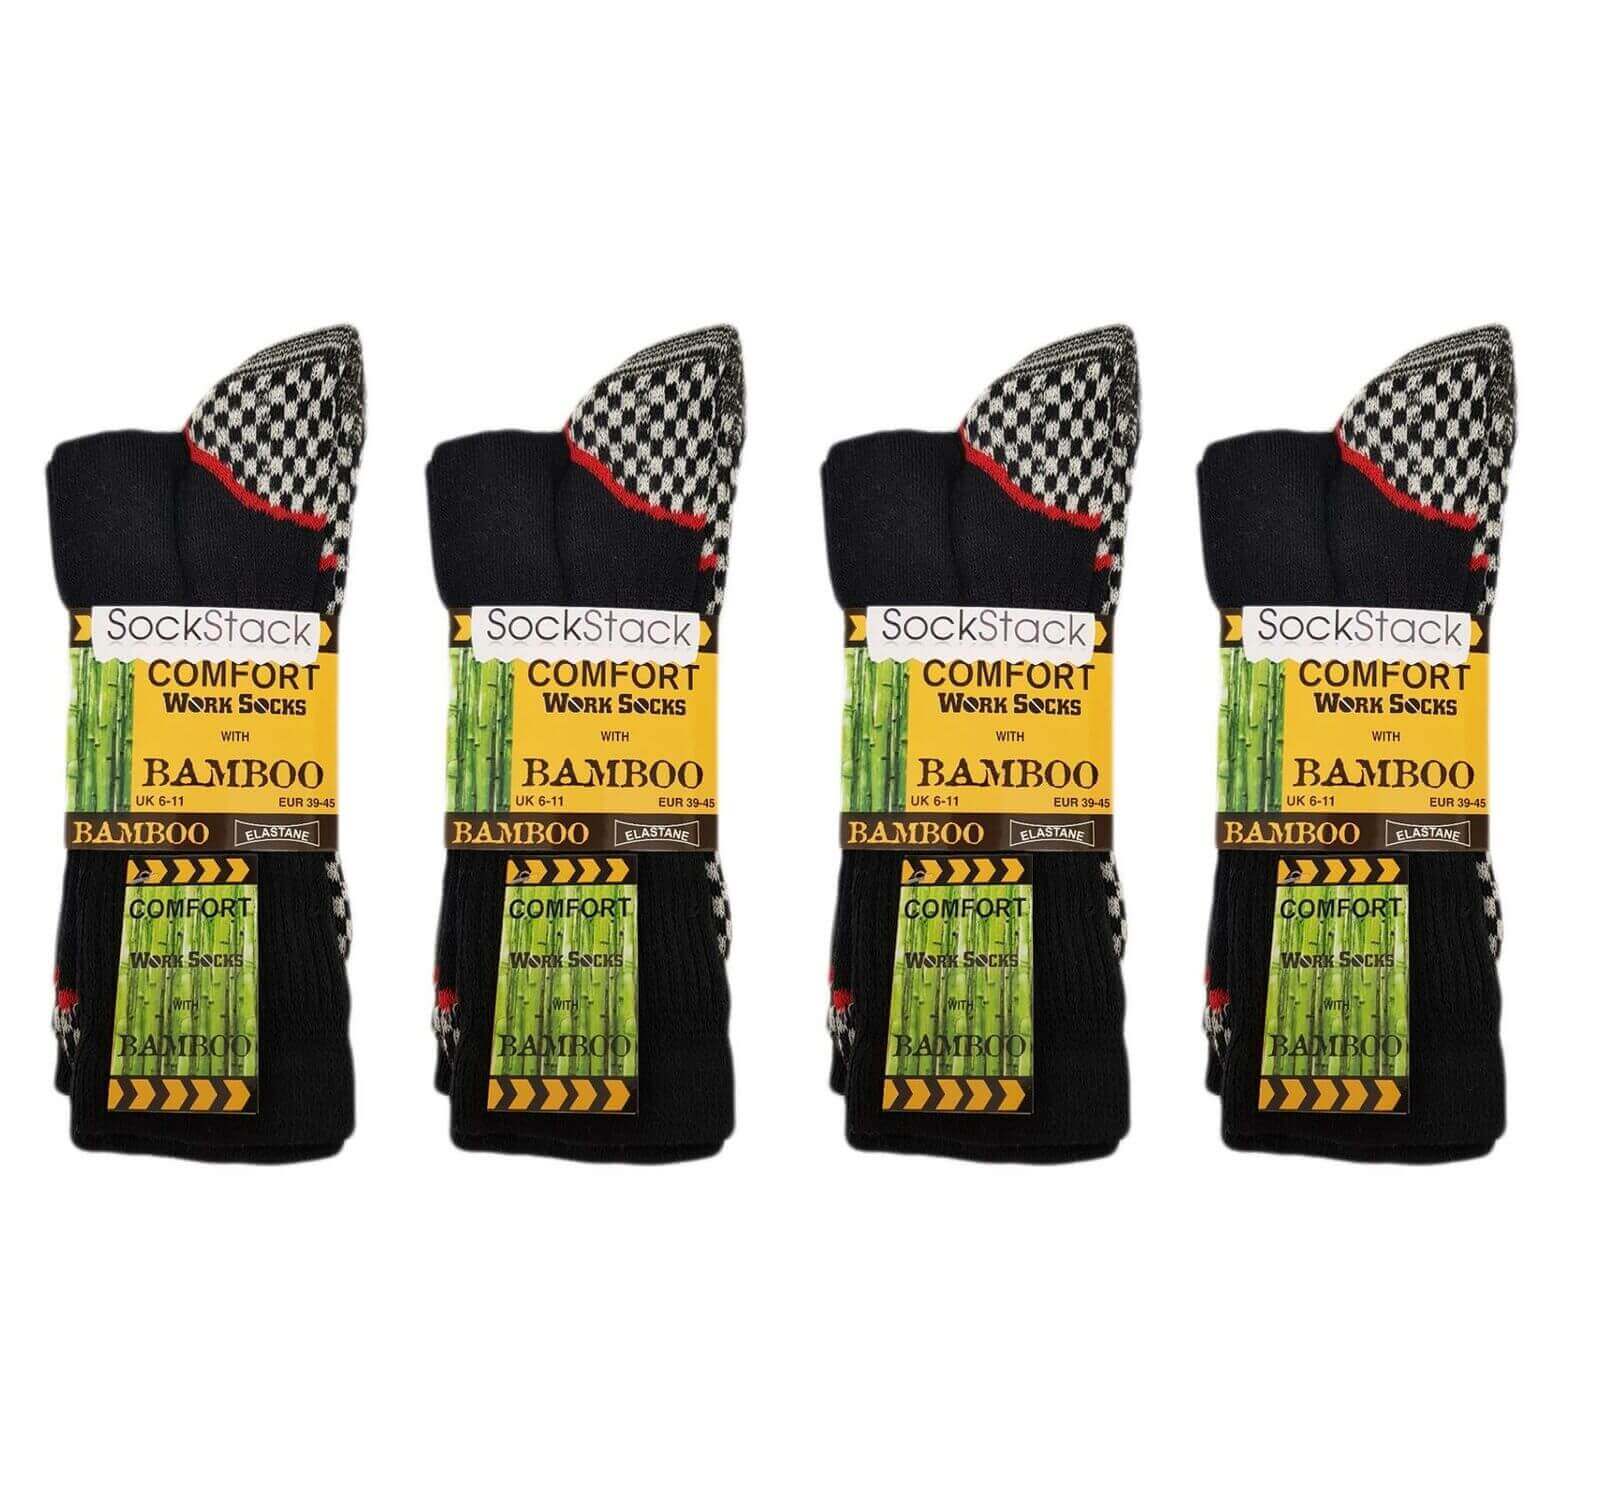 12 Pairs Of Men's Bamboo Work Socks Heavy Duty Ultimate Work Boot Sock, UK 6-11. Buy now for £18.00. A Socks by Sock Stack. 6-11, assorted, athletics, bamboo, black, black socks, blue, boot socks, boys socks, breathable, comfortable, cosy, cotton, cushion